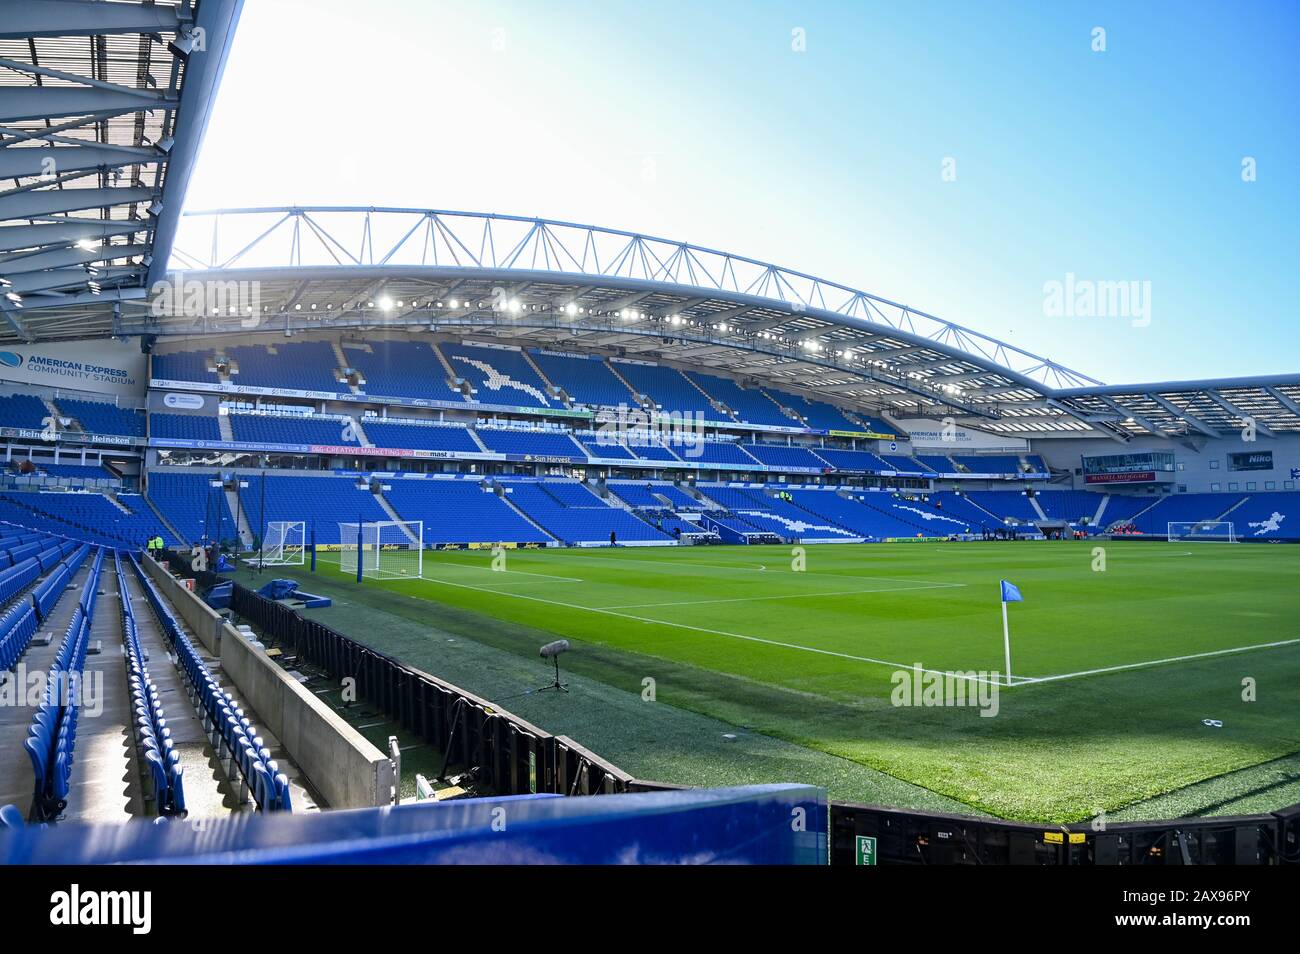 Inside the Amex Stadium before the Premier League match between Brighton and Hove Albion and Watford at The Amex Stadium Brighton, UK - 8th February 2020 - Editorial use only. No merchandising. For Football images FA and Premier League restrictions apply inc. no internet/mobile usage without FAPL license - for details contact Football Dataco Stock Photo